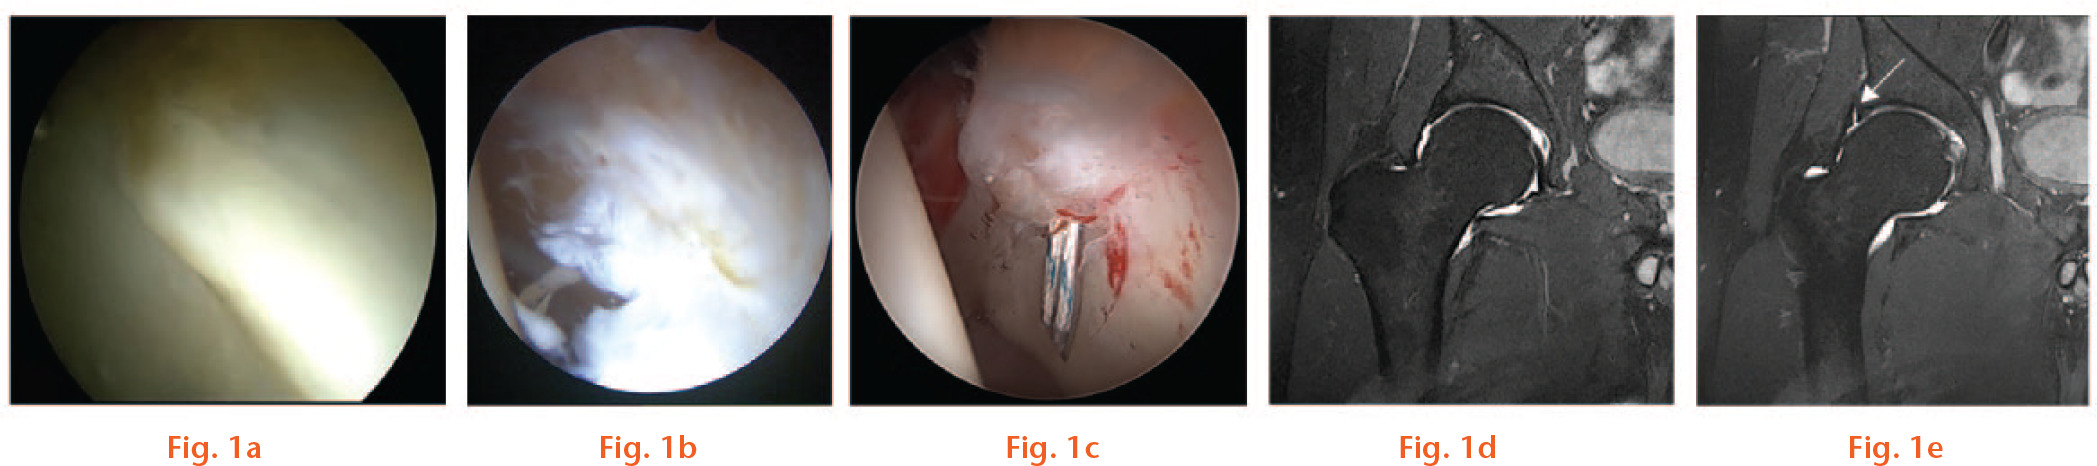  
          Intraoperative and radiological imaging of the acetabular labrum. a) An intact and b) a torn human labrum viewed through an arthroscope; c) a torn labrum undergoing arthroscopic repair; coronal T2 MRI images of a human hip with d) an intact and e) a torn labrum (tear highlighted with an arrow).
        